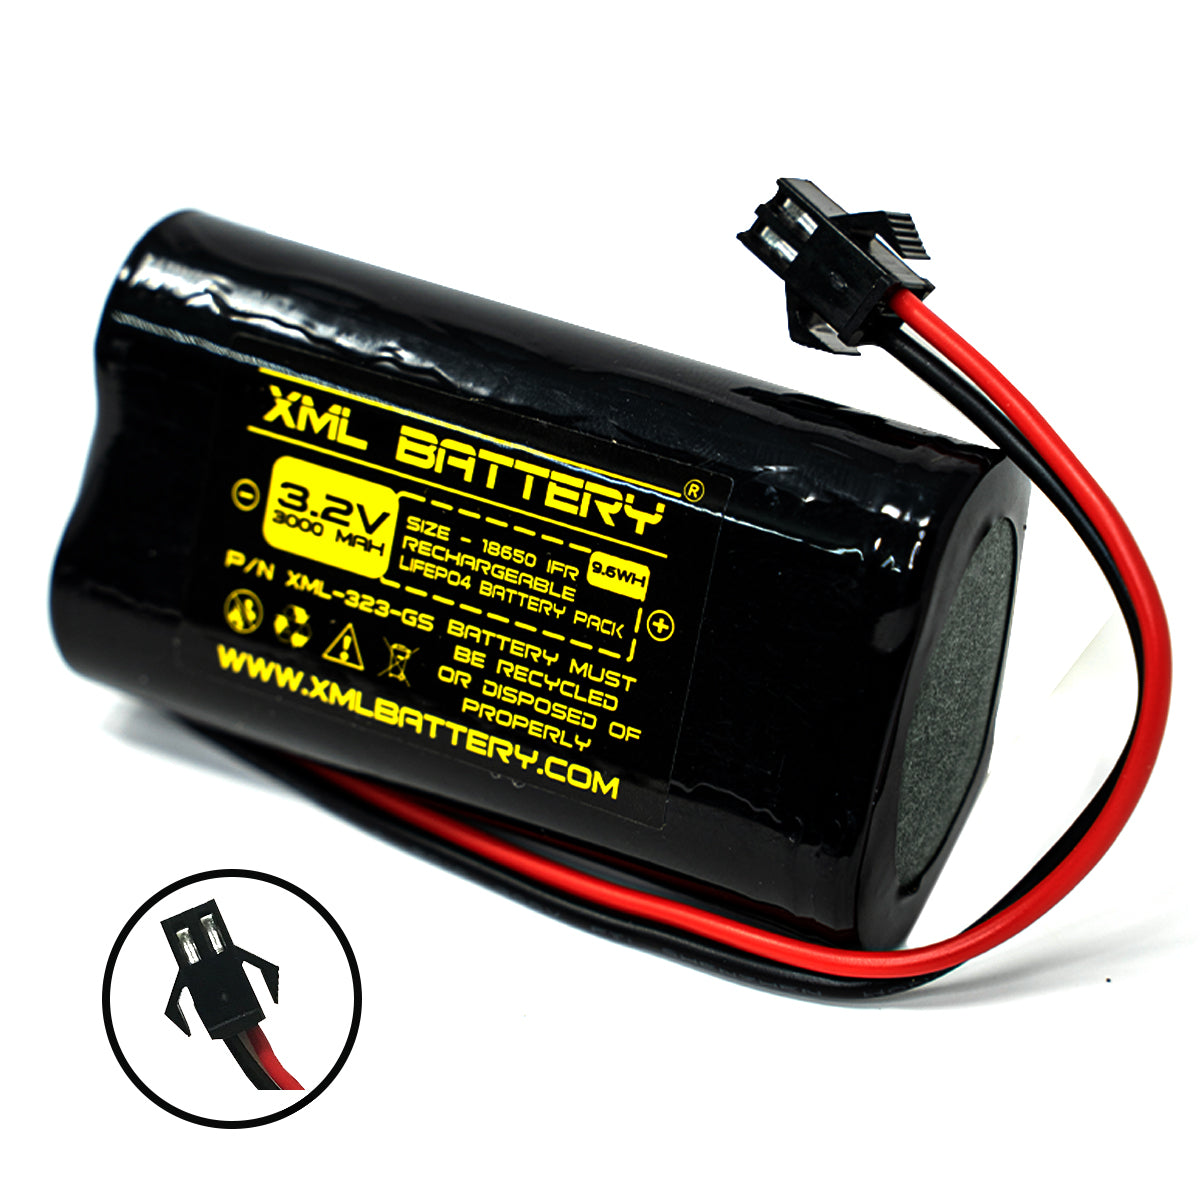 3.2v 3000mAh LIFEPO4 Battery Pack Replacement for Outdoor Solar